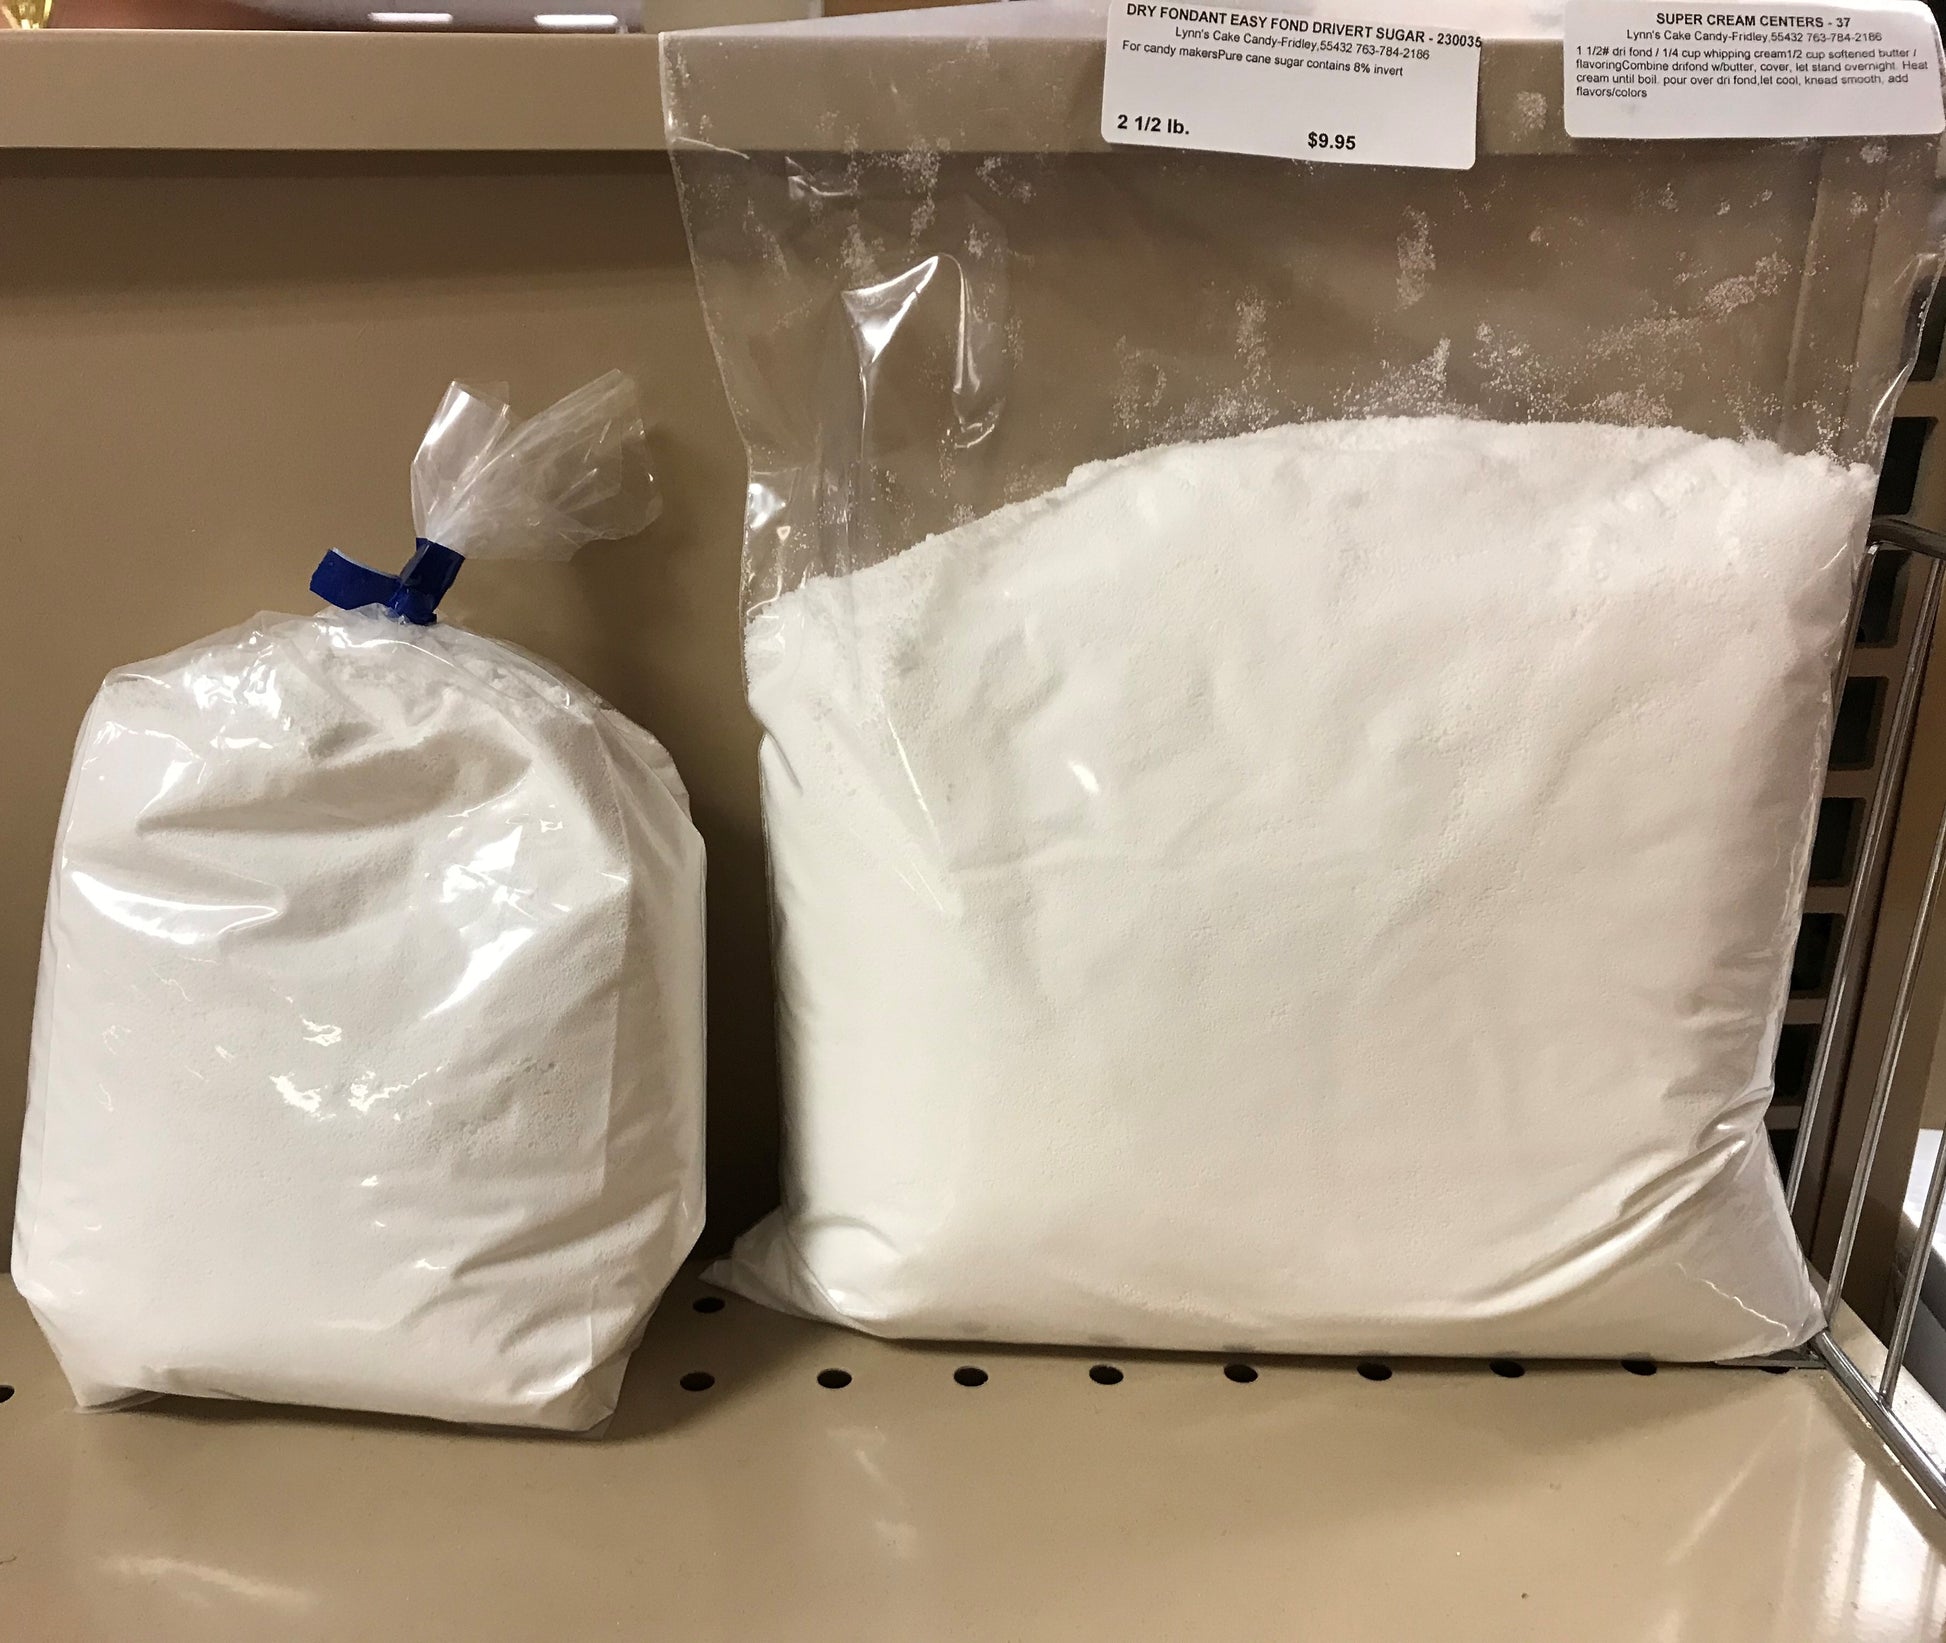 Two Bags of Dry Fondant on a Shelf